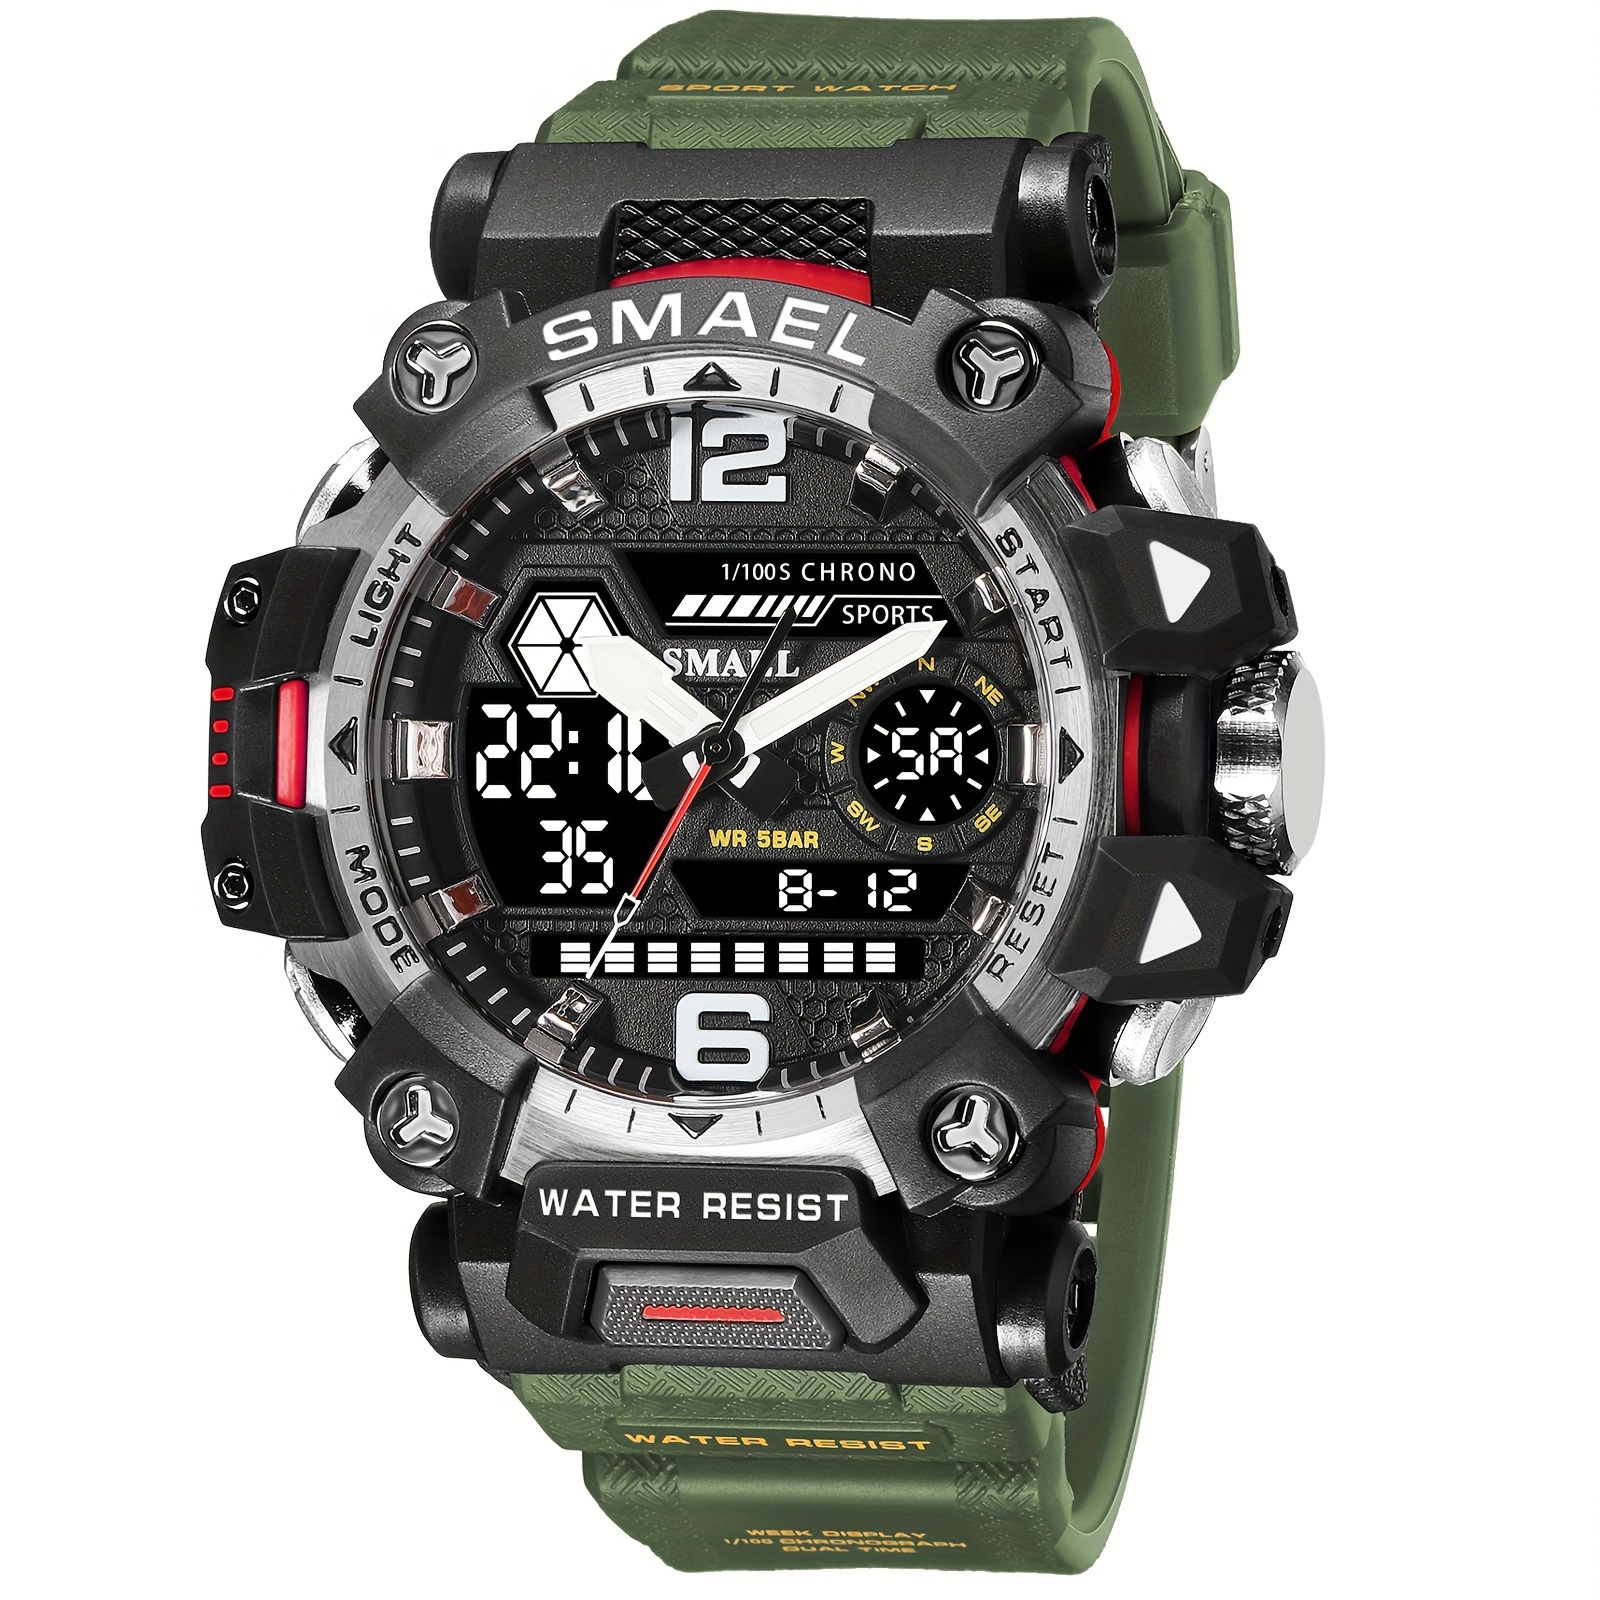 

Smael Tactical Men's Watch - Dual Display, Waterproof Ip68, Stopwatch & Calendar Features, Sporty Design With Durable Tpu Strap